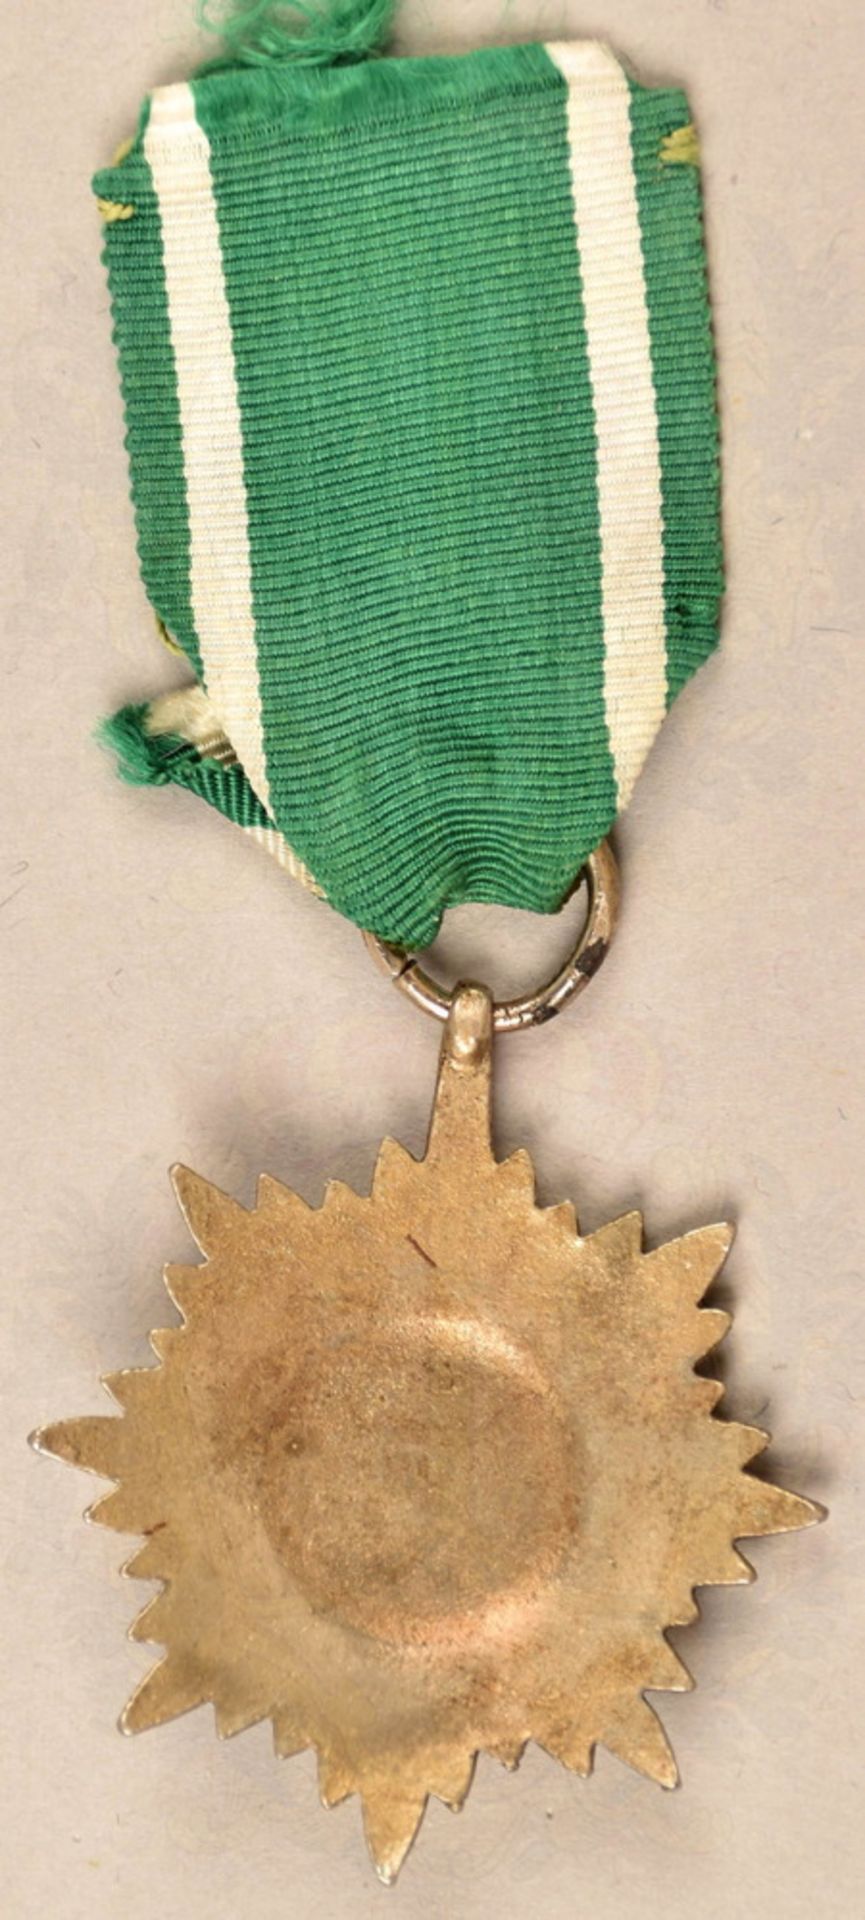 Medal of Merit for members of the Eastern People 2nd Class - Image 2 of 2